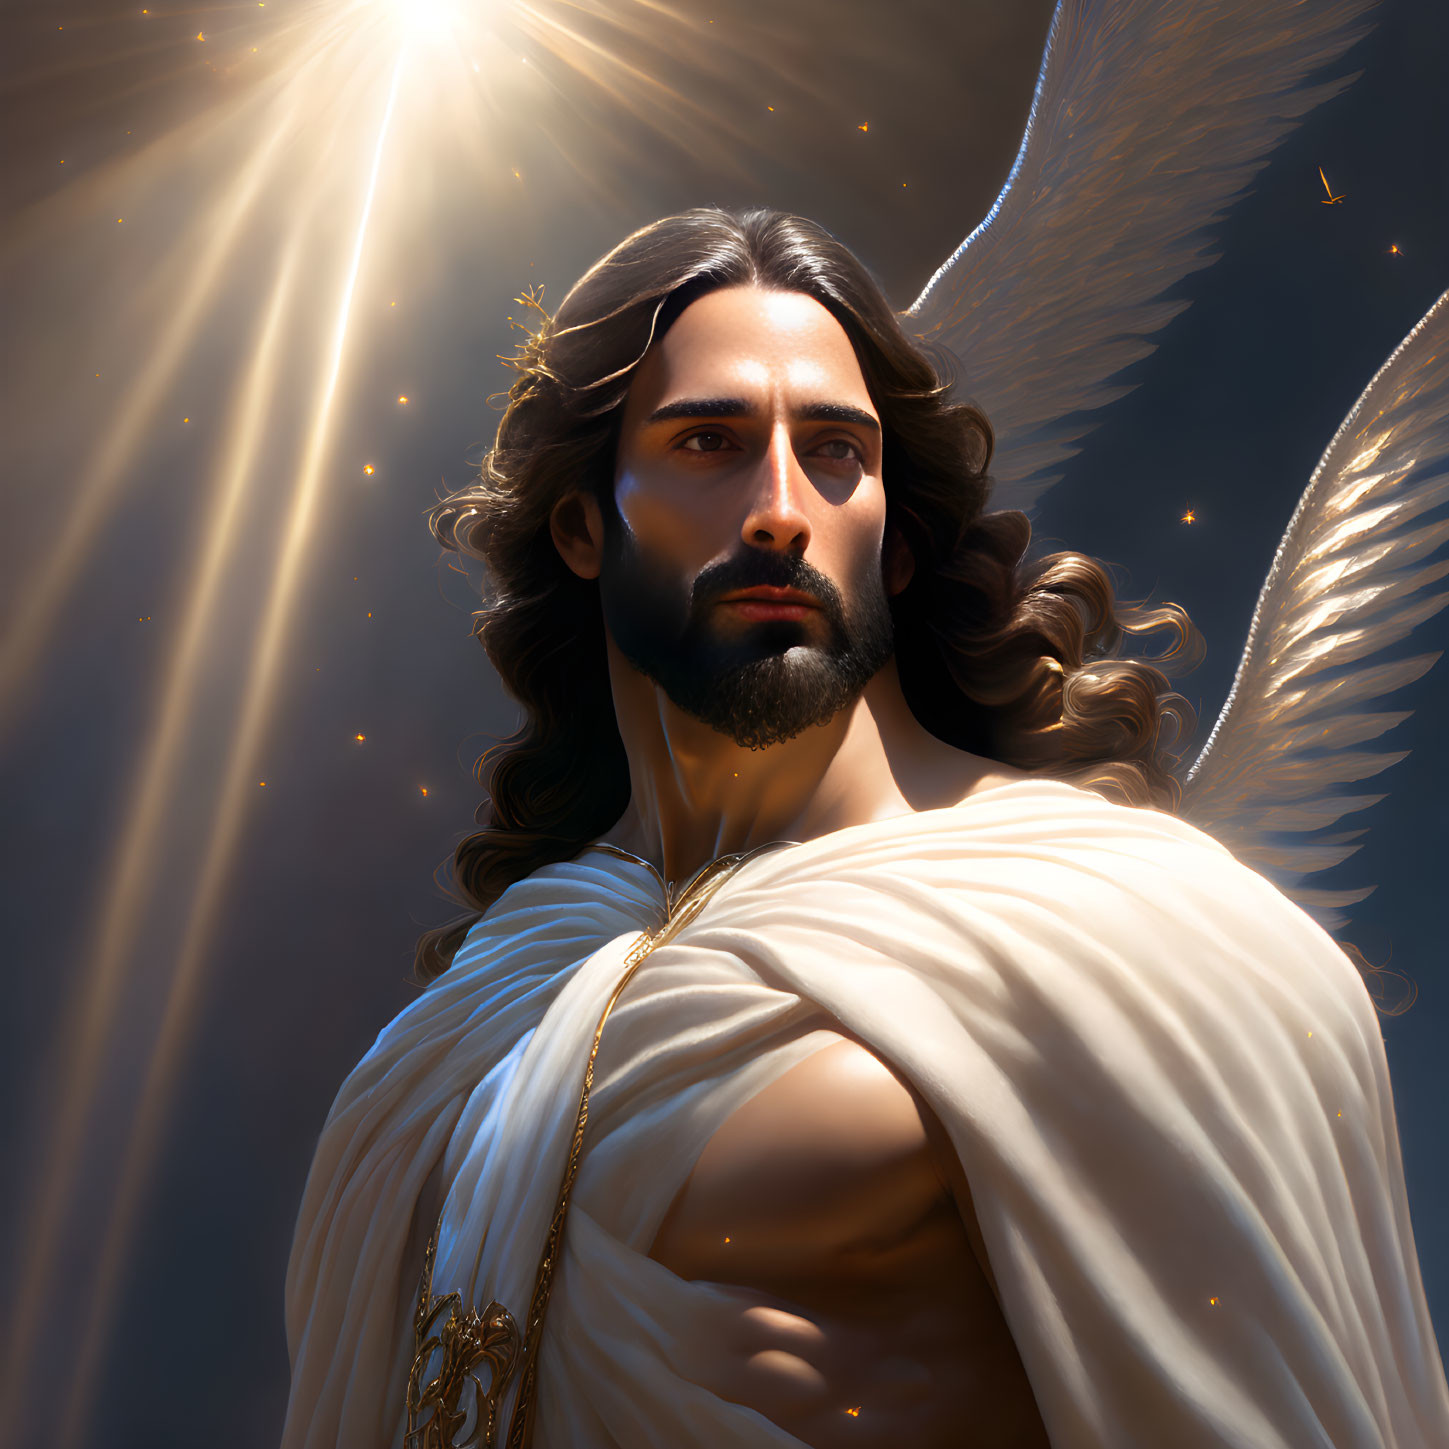 Figure with Angelic Wings Emitting Light and Divine Aura in White and Gold